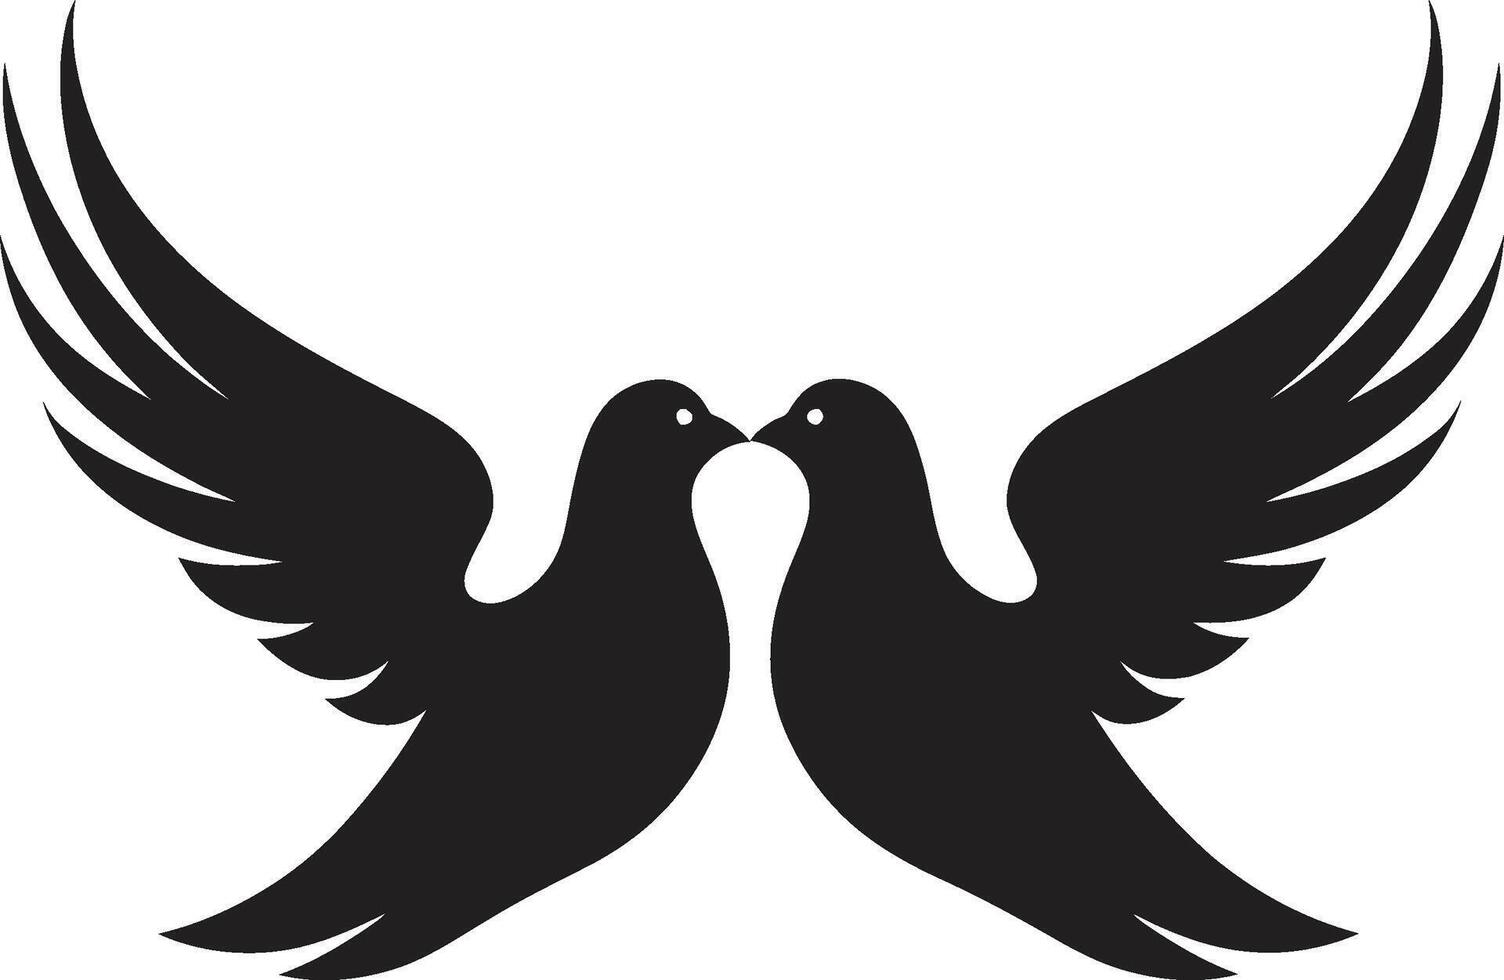 Eternal Serenity Dove Pair Element Harmony in Flight of a Dove Pair vector